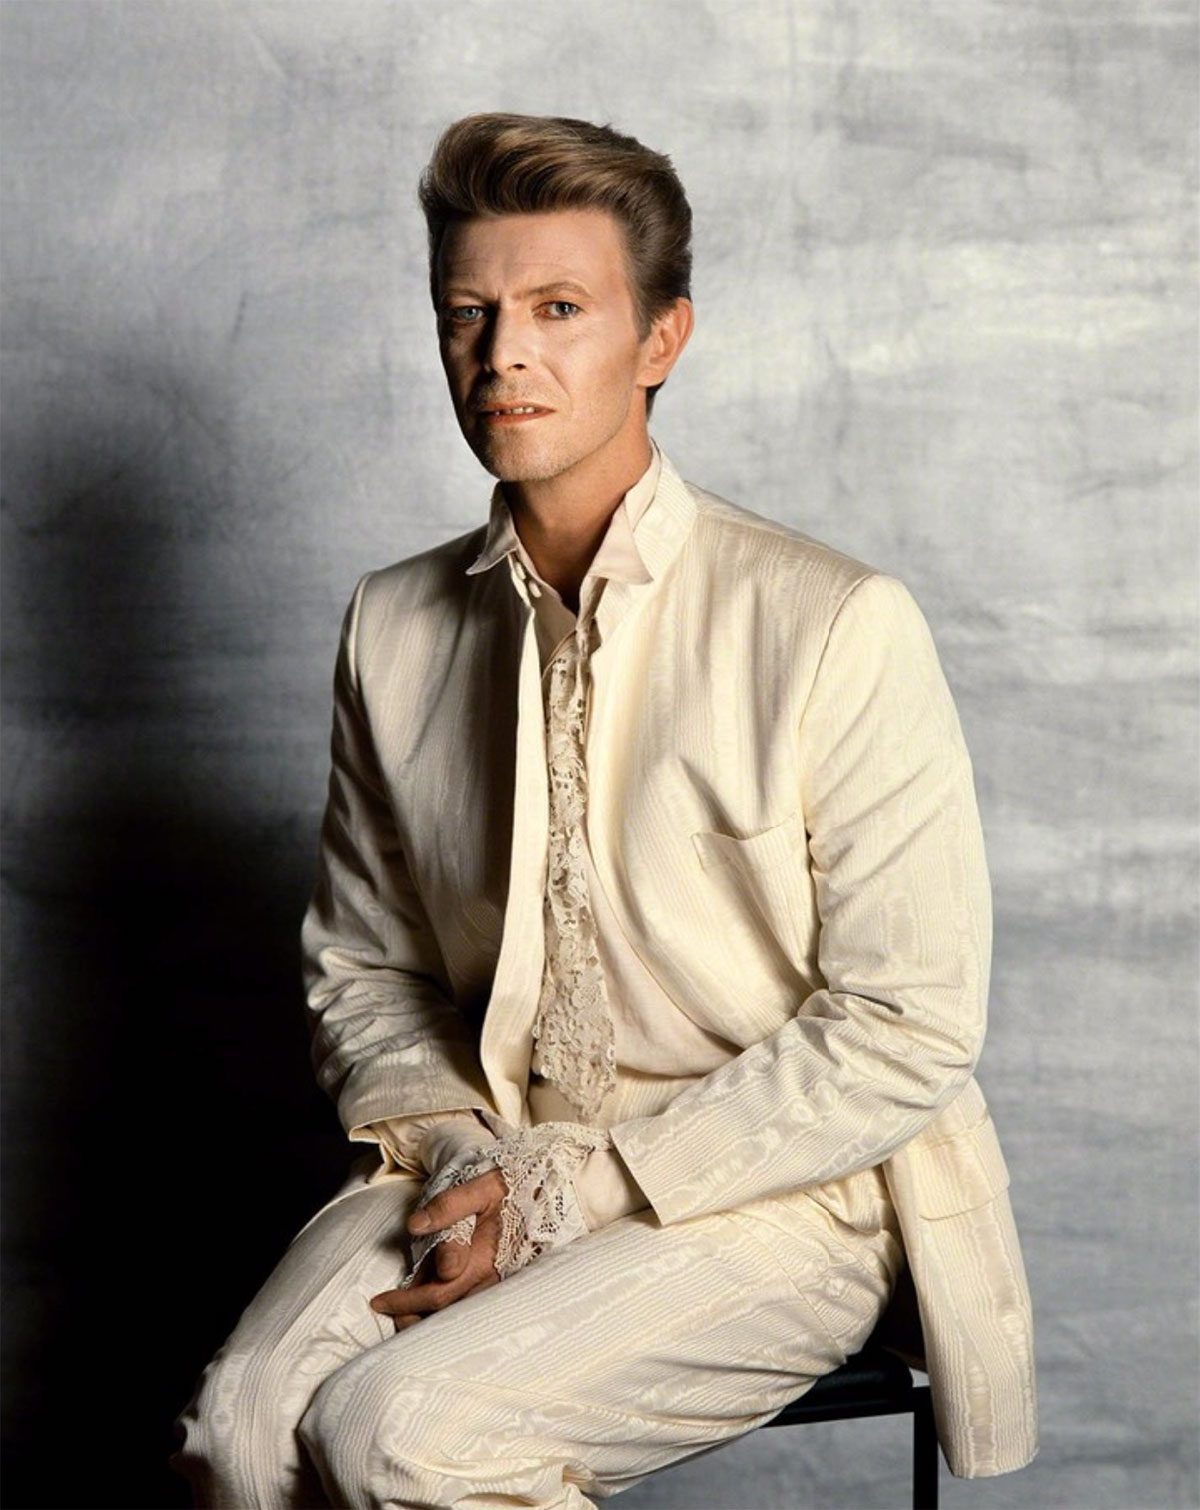 David-Bowie,-McGee-Studios-(As-seen-in-National-Portrait-Gallery)-,-1990